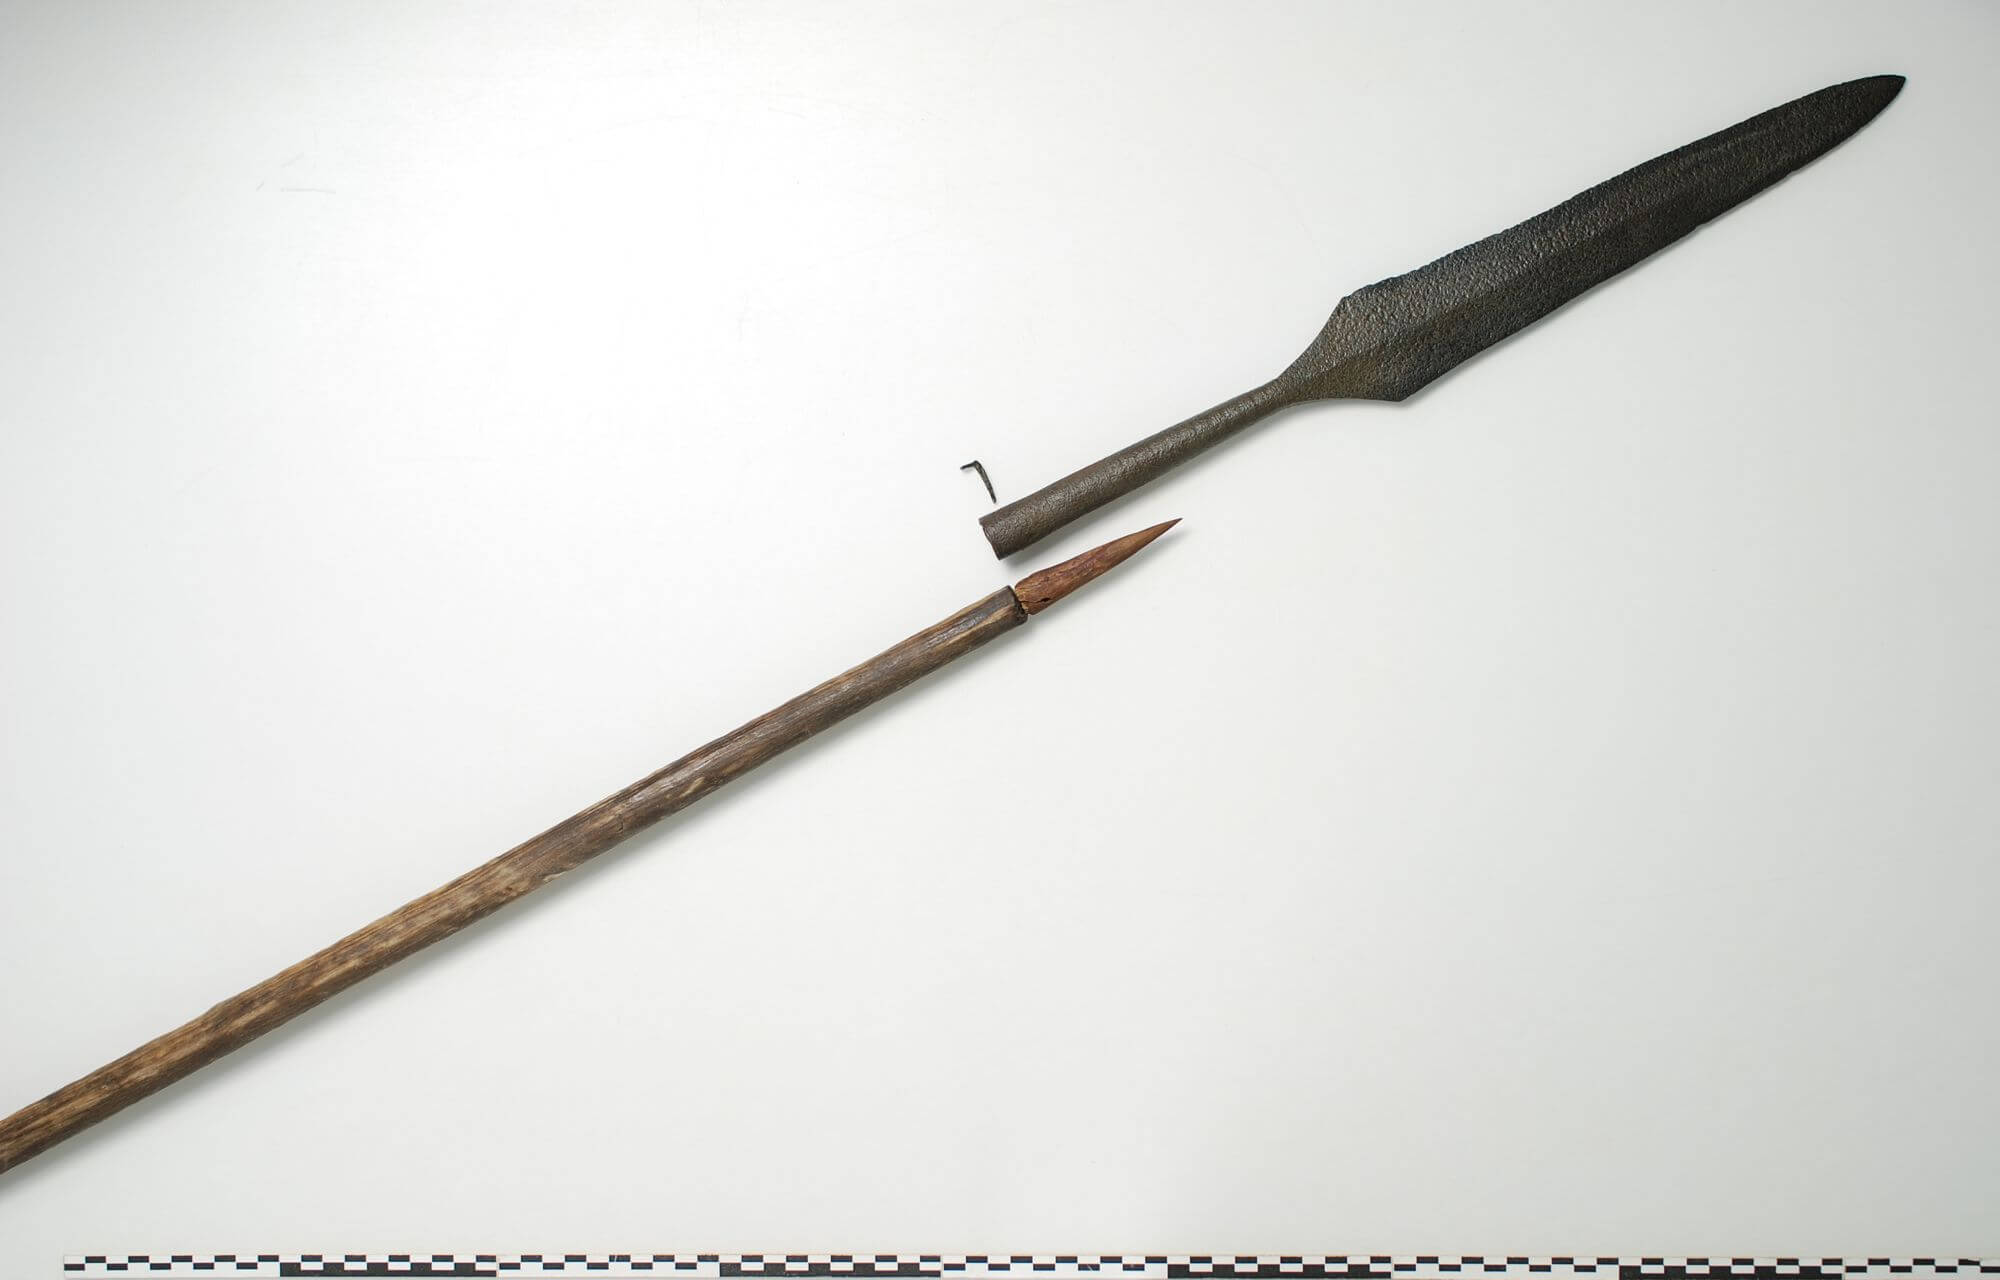 As far as we know, it is the only preserved Viking spear in Scandinavia. 